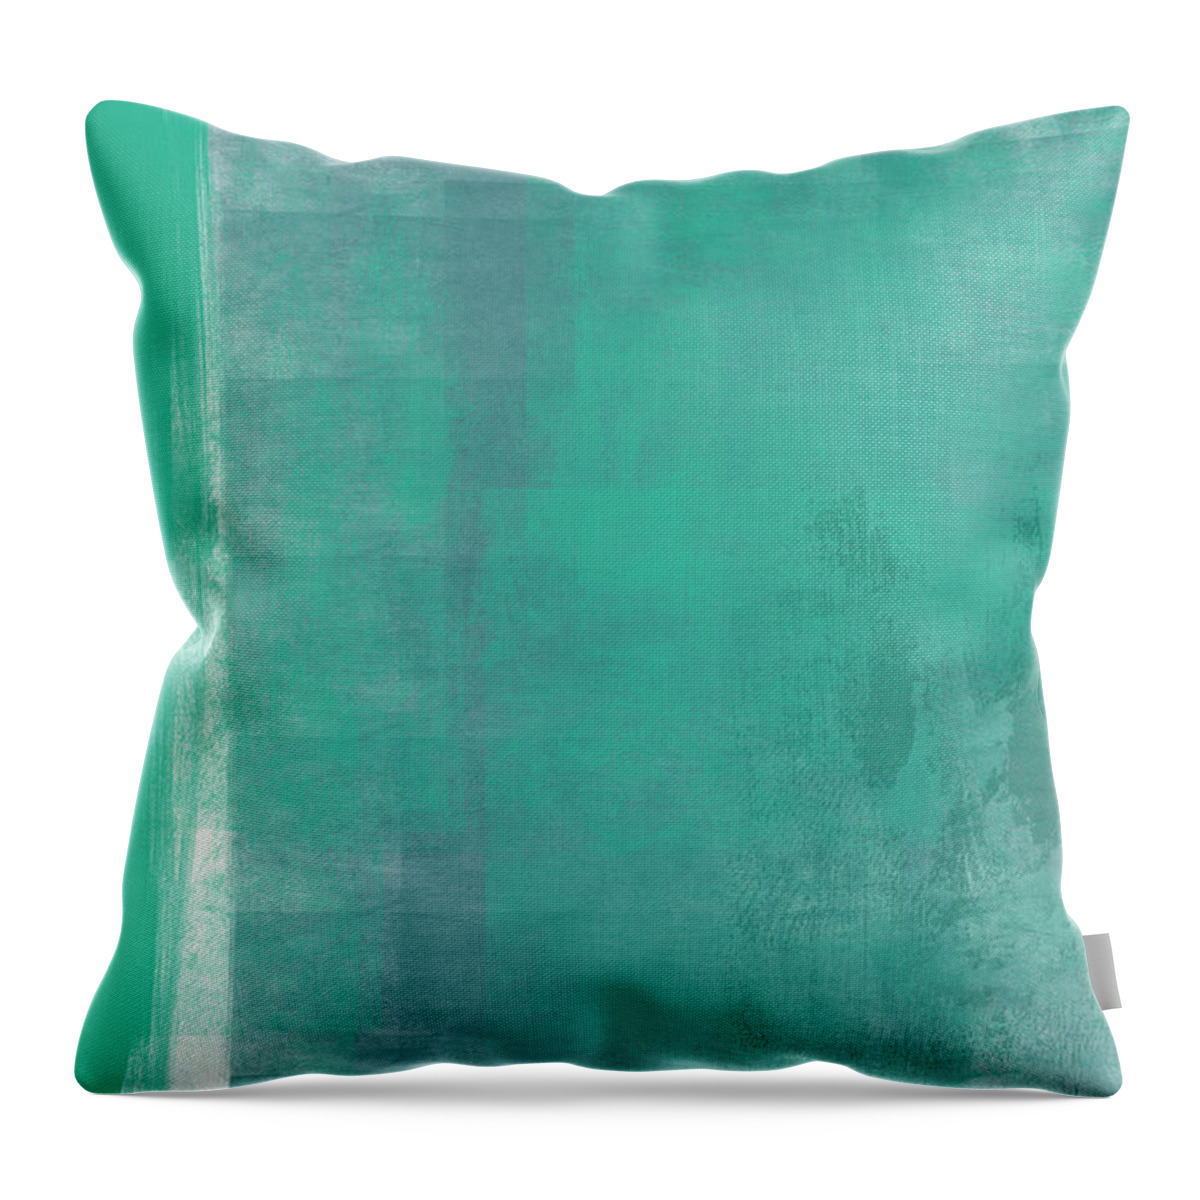 Abstract Throw Pillow featuring the painting Beach Glass 2 by Linda Woods